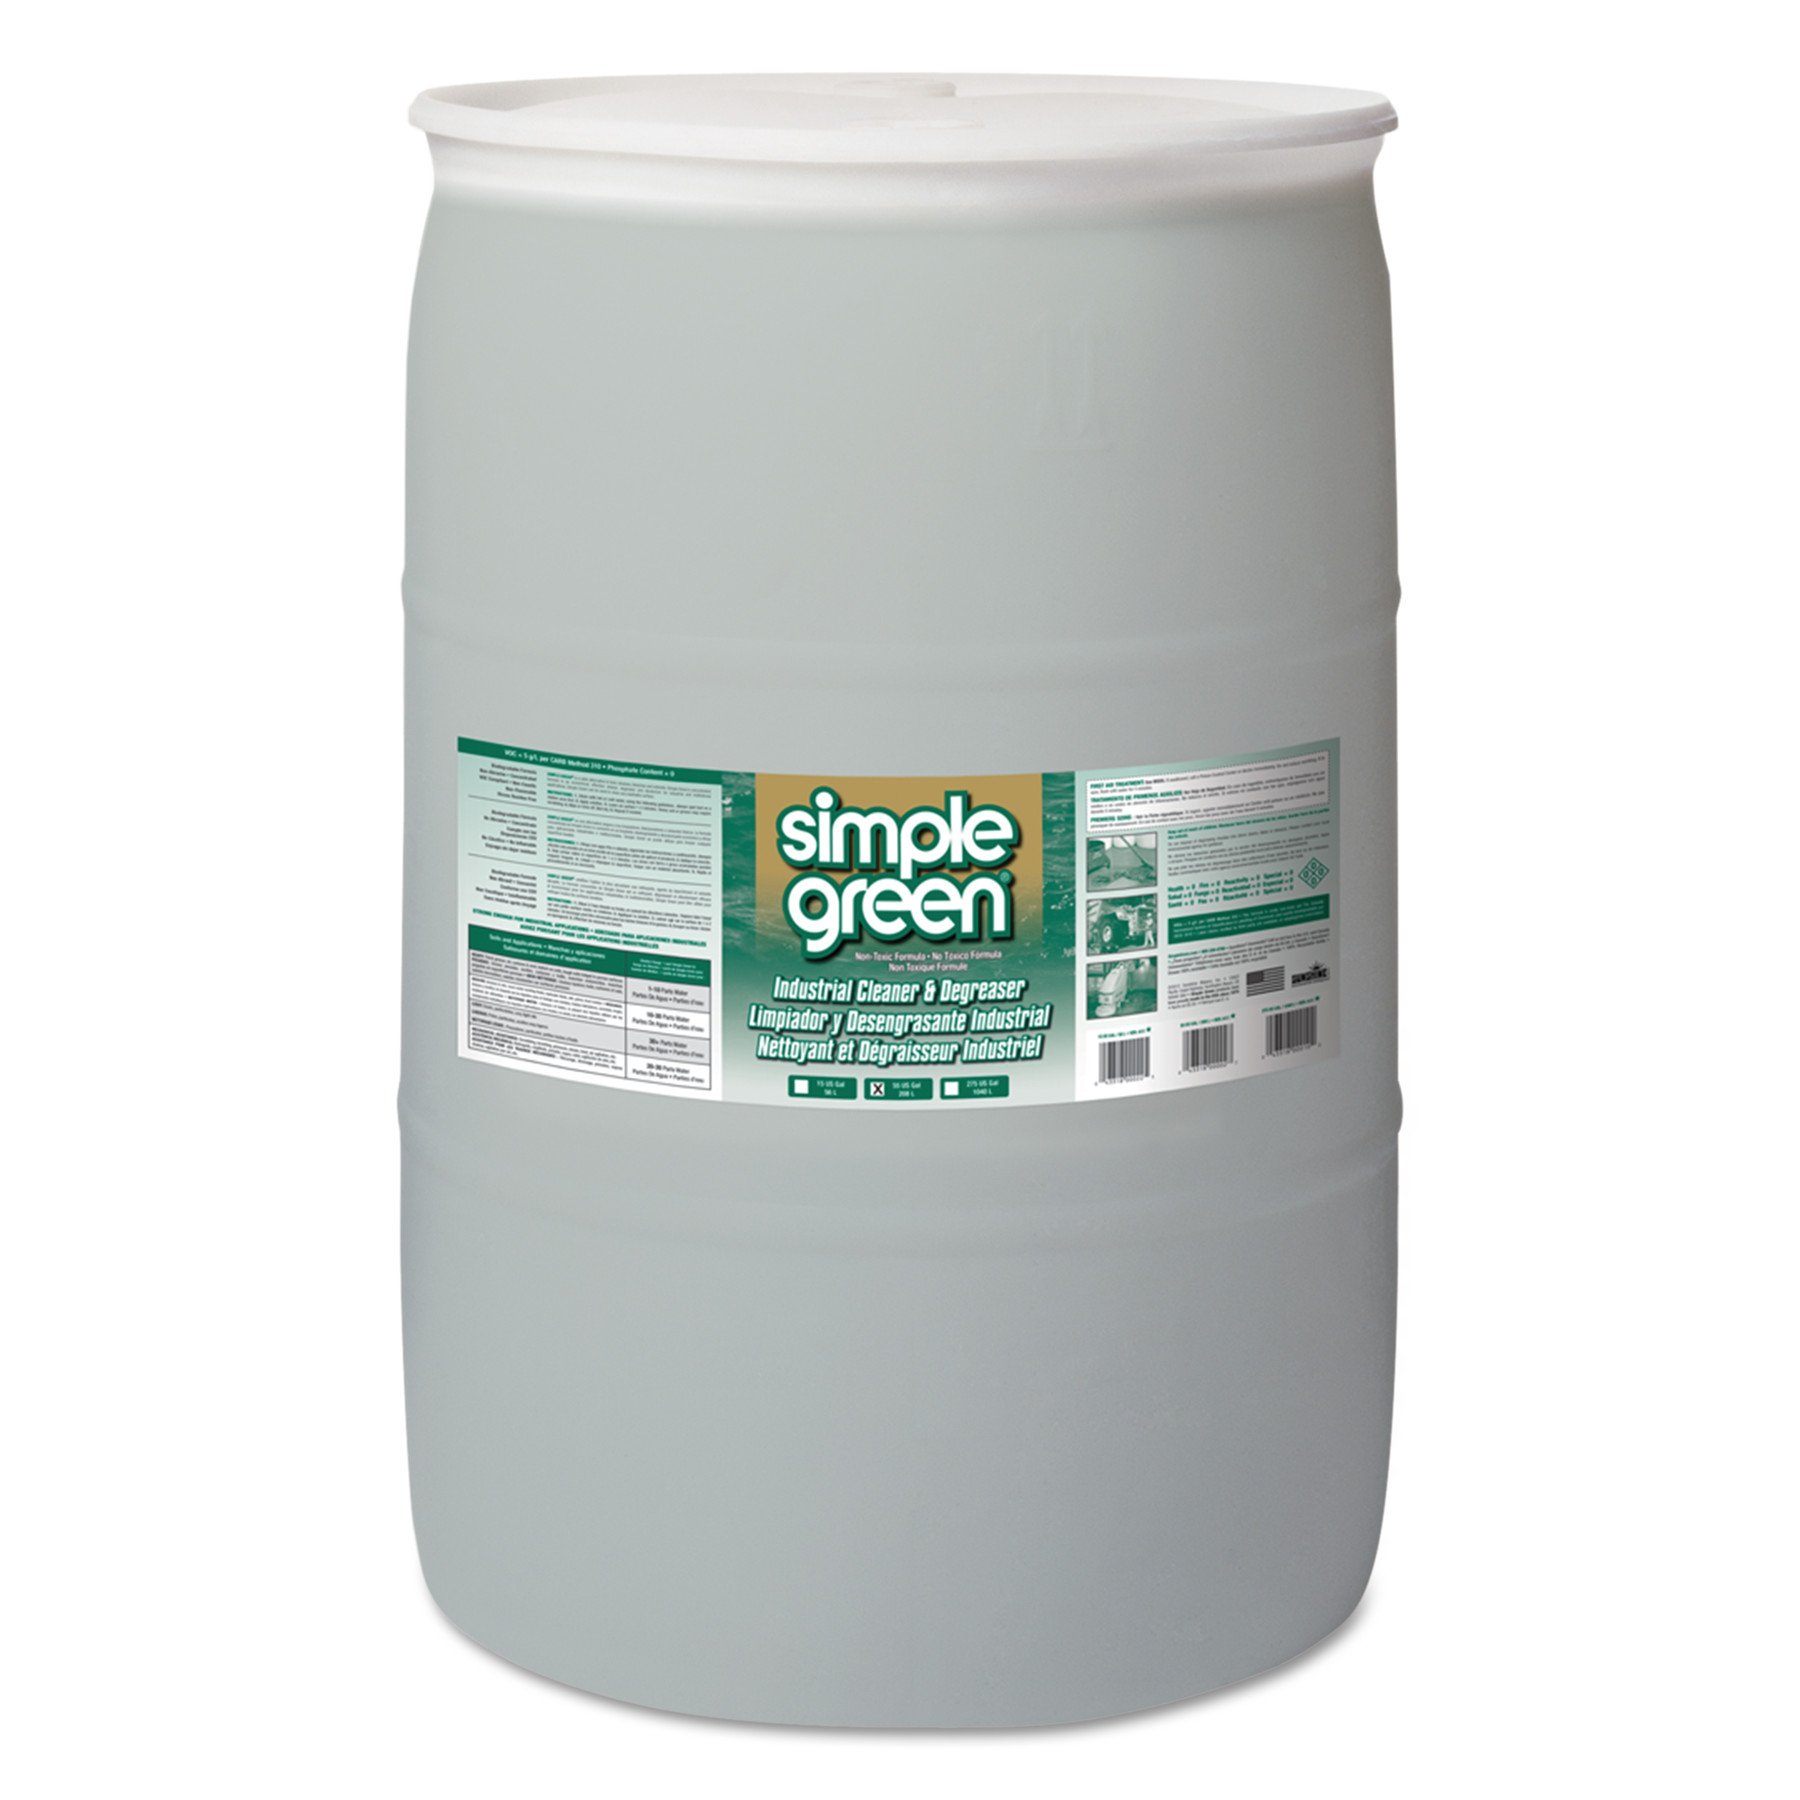 Simple Green 13008 Industrial Cleaner & Degreaser, Conc...